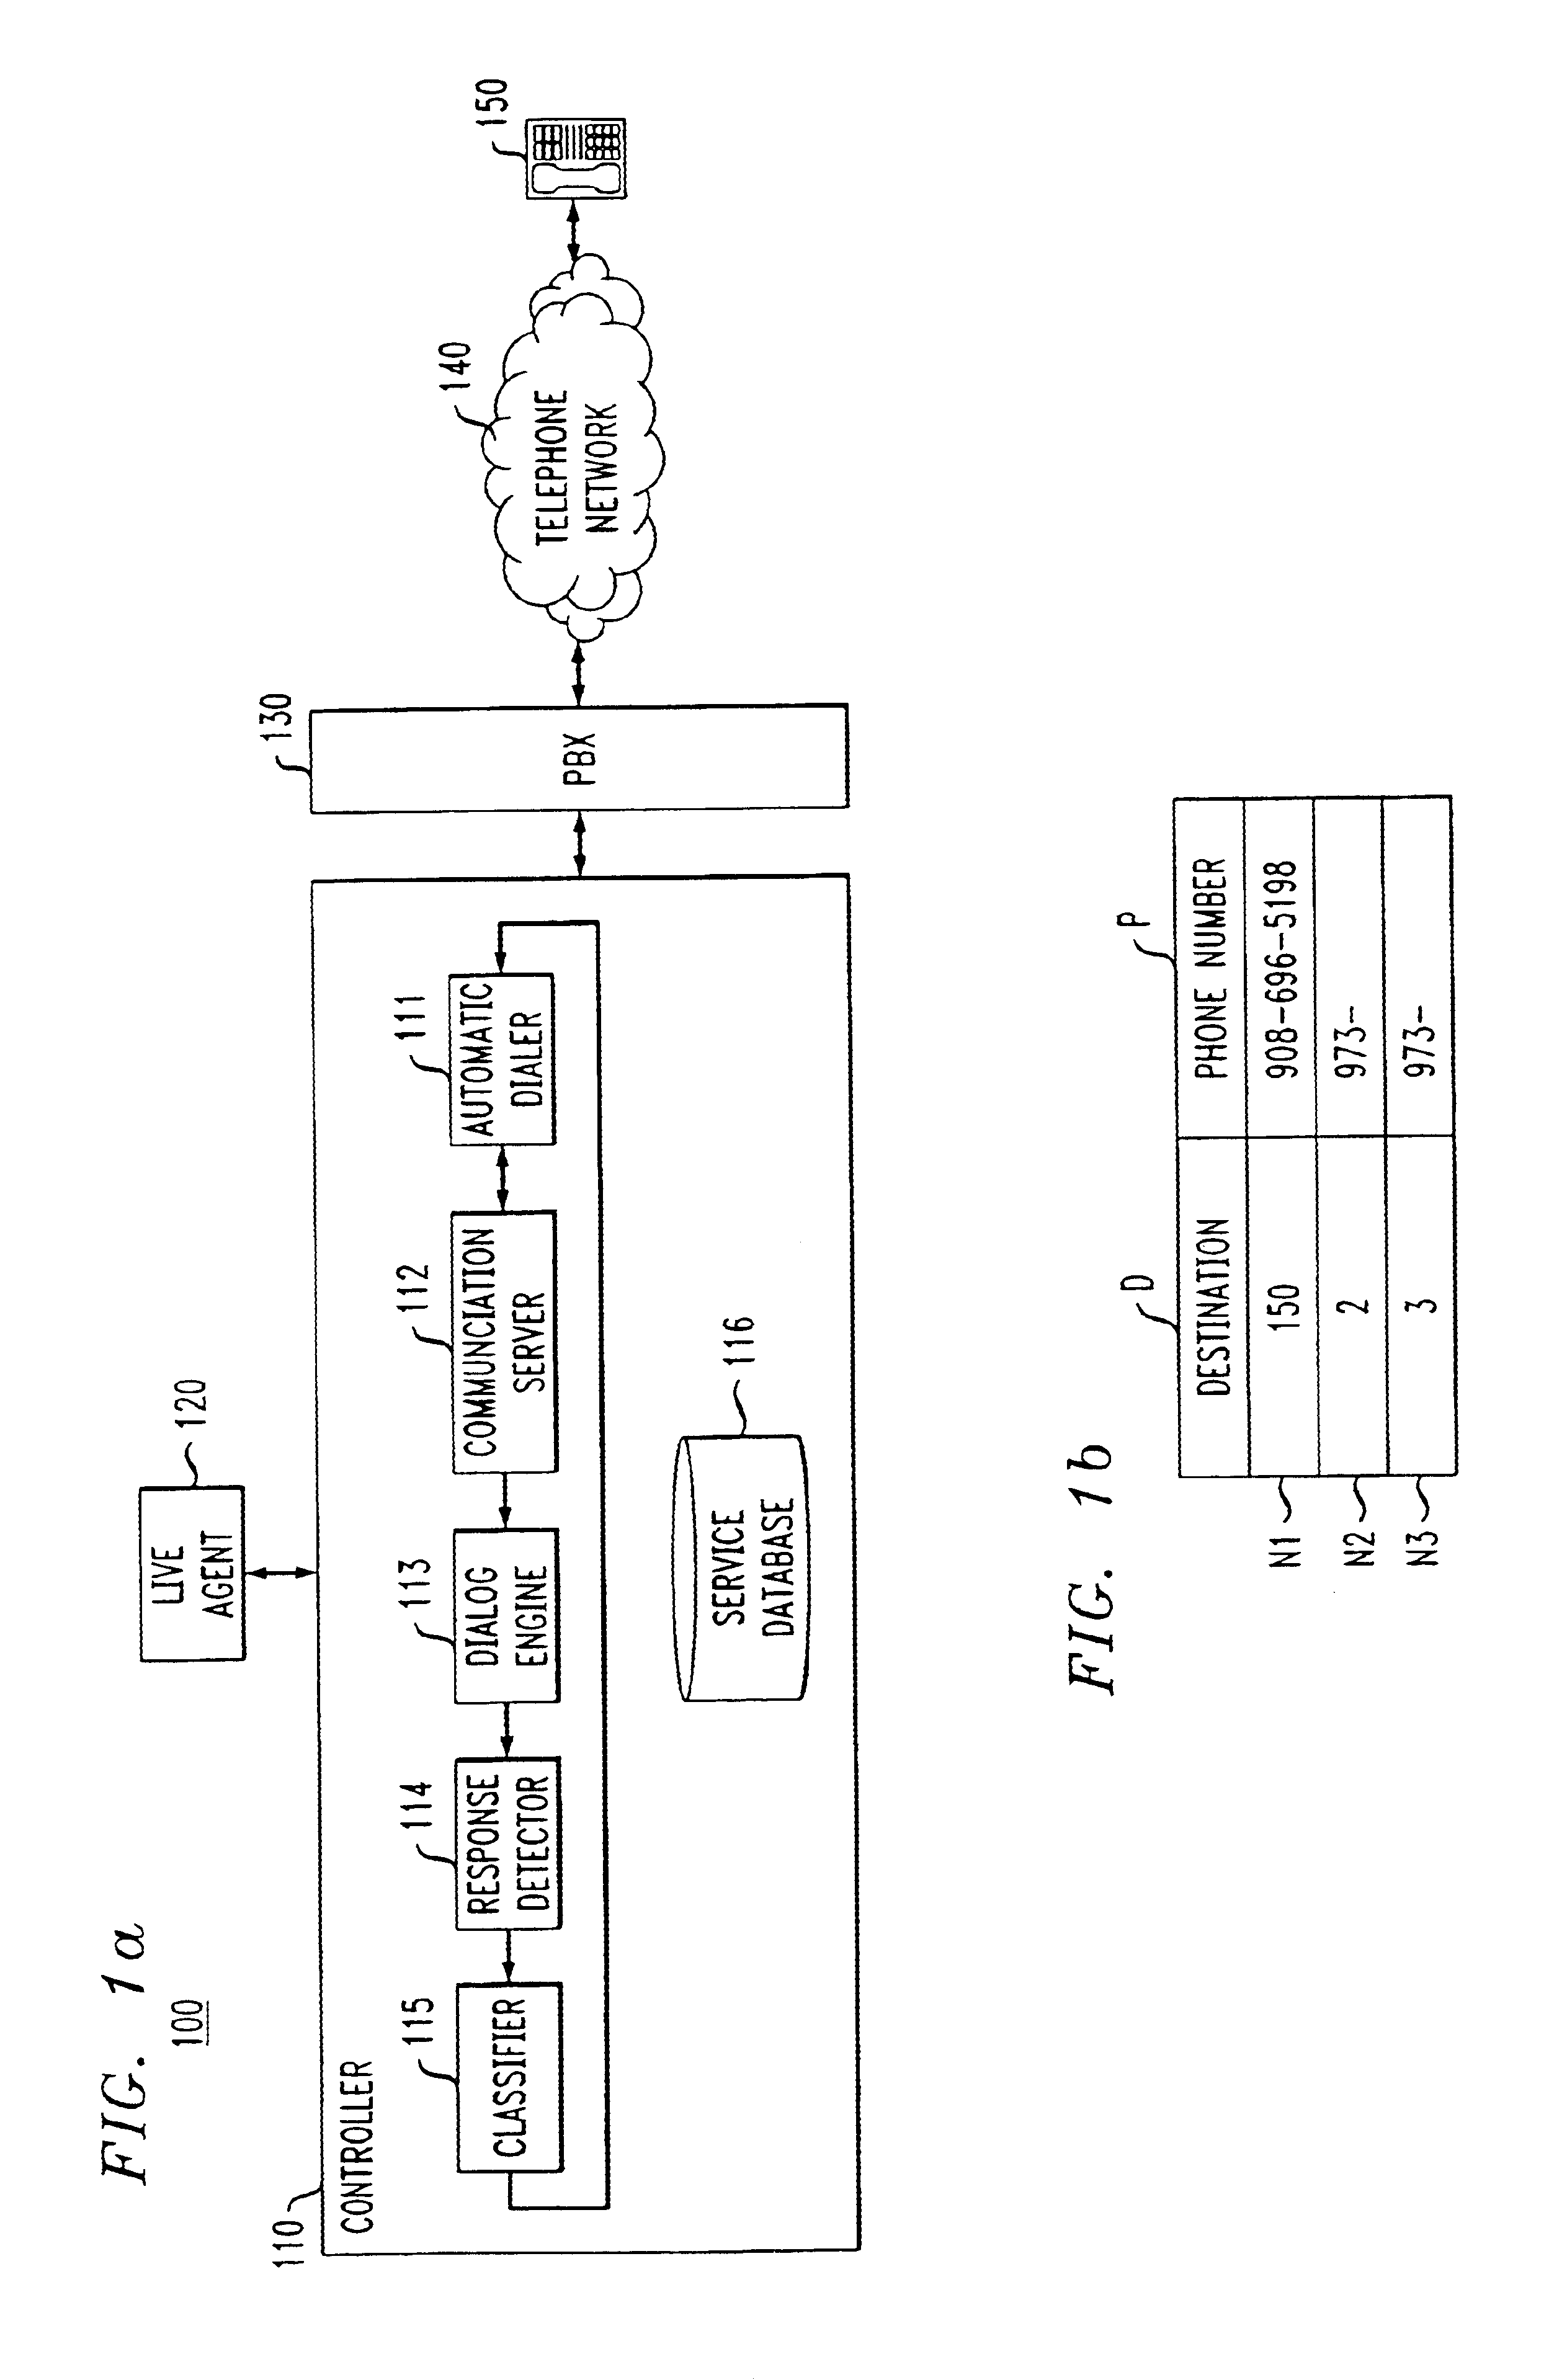 Method and apparatus for answering machine detection in automatic dialing